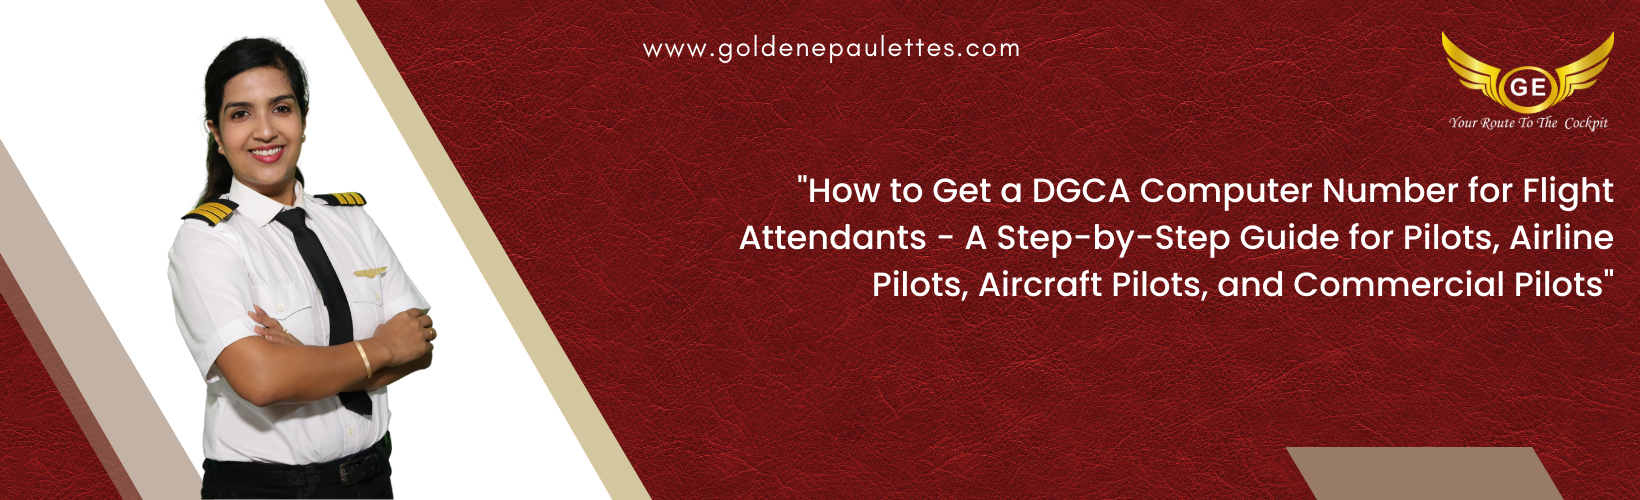 How to Obtain a DGCA Computer Number for Flight Attendants